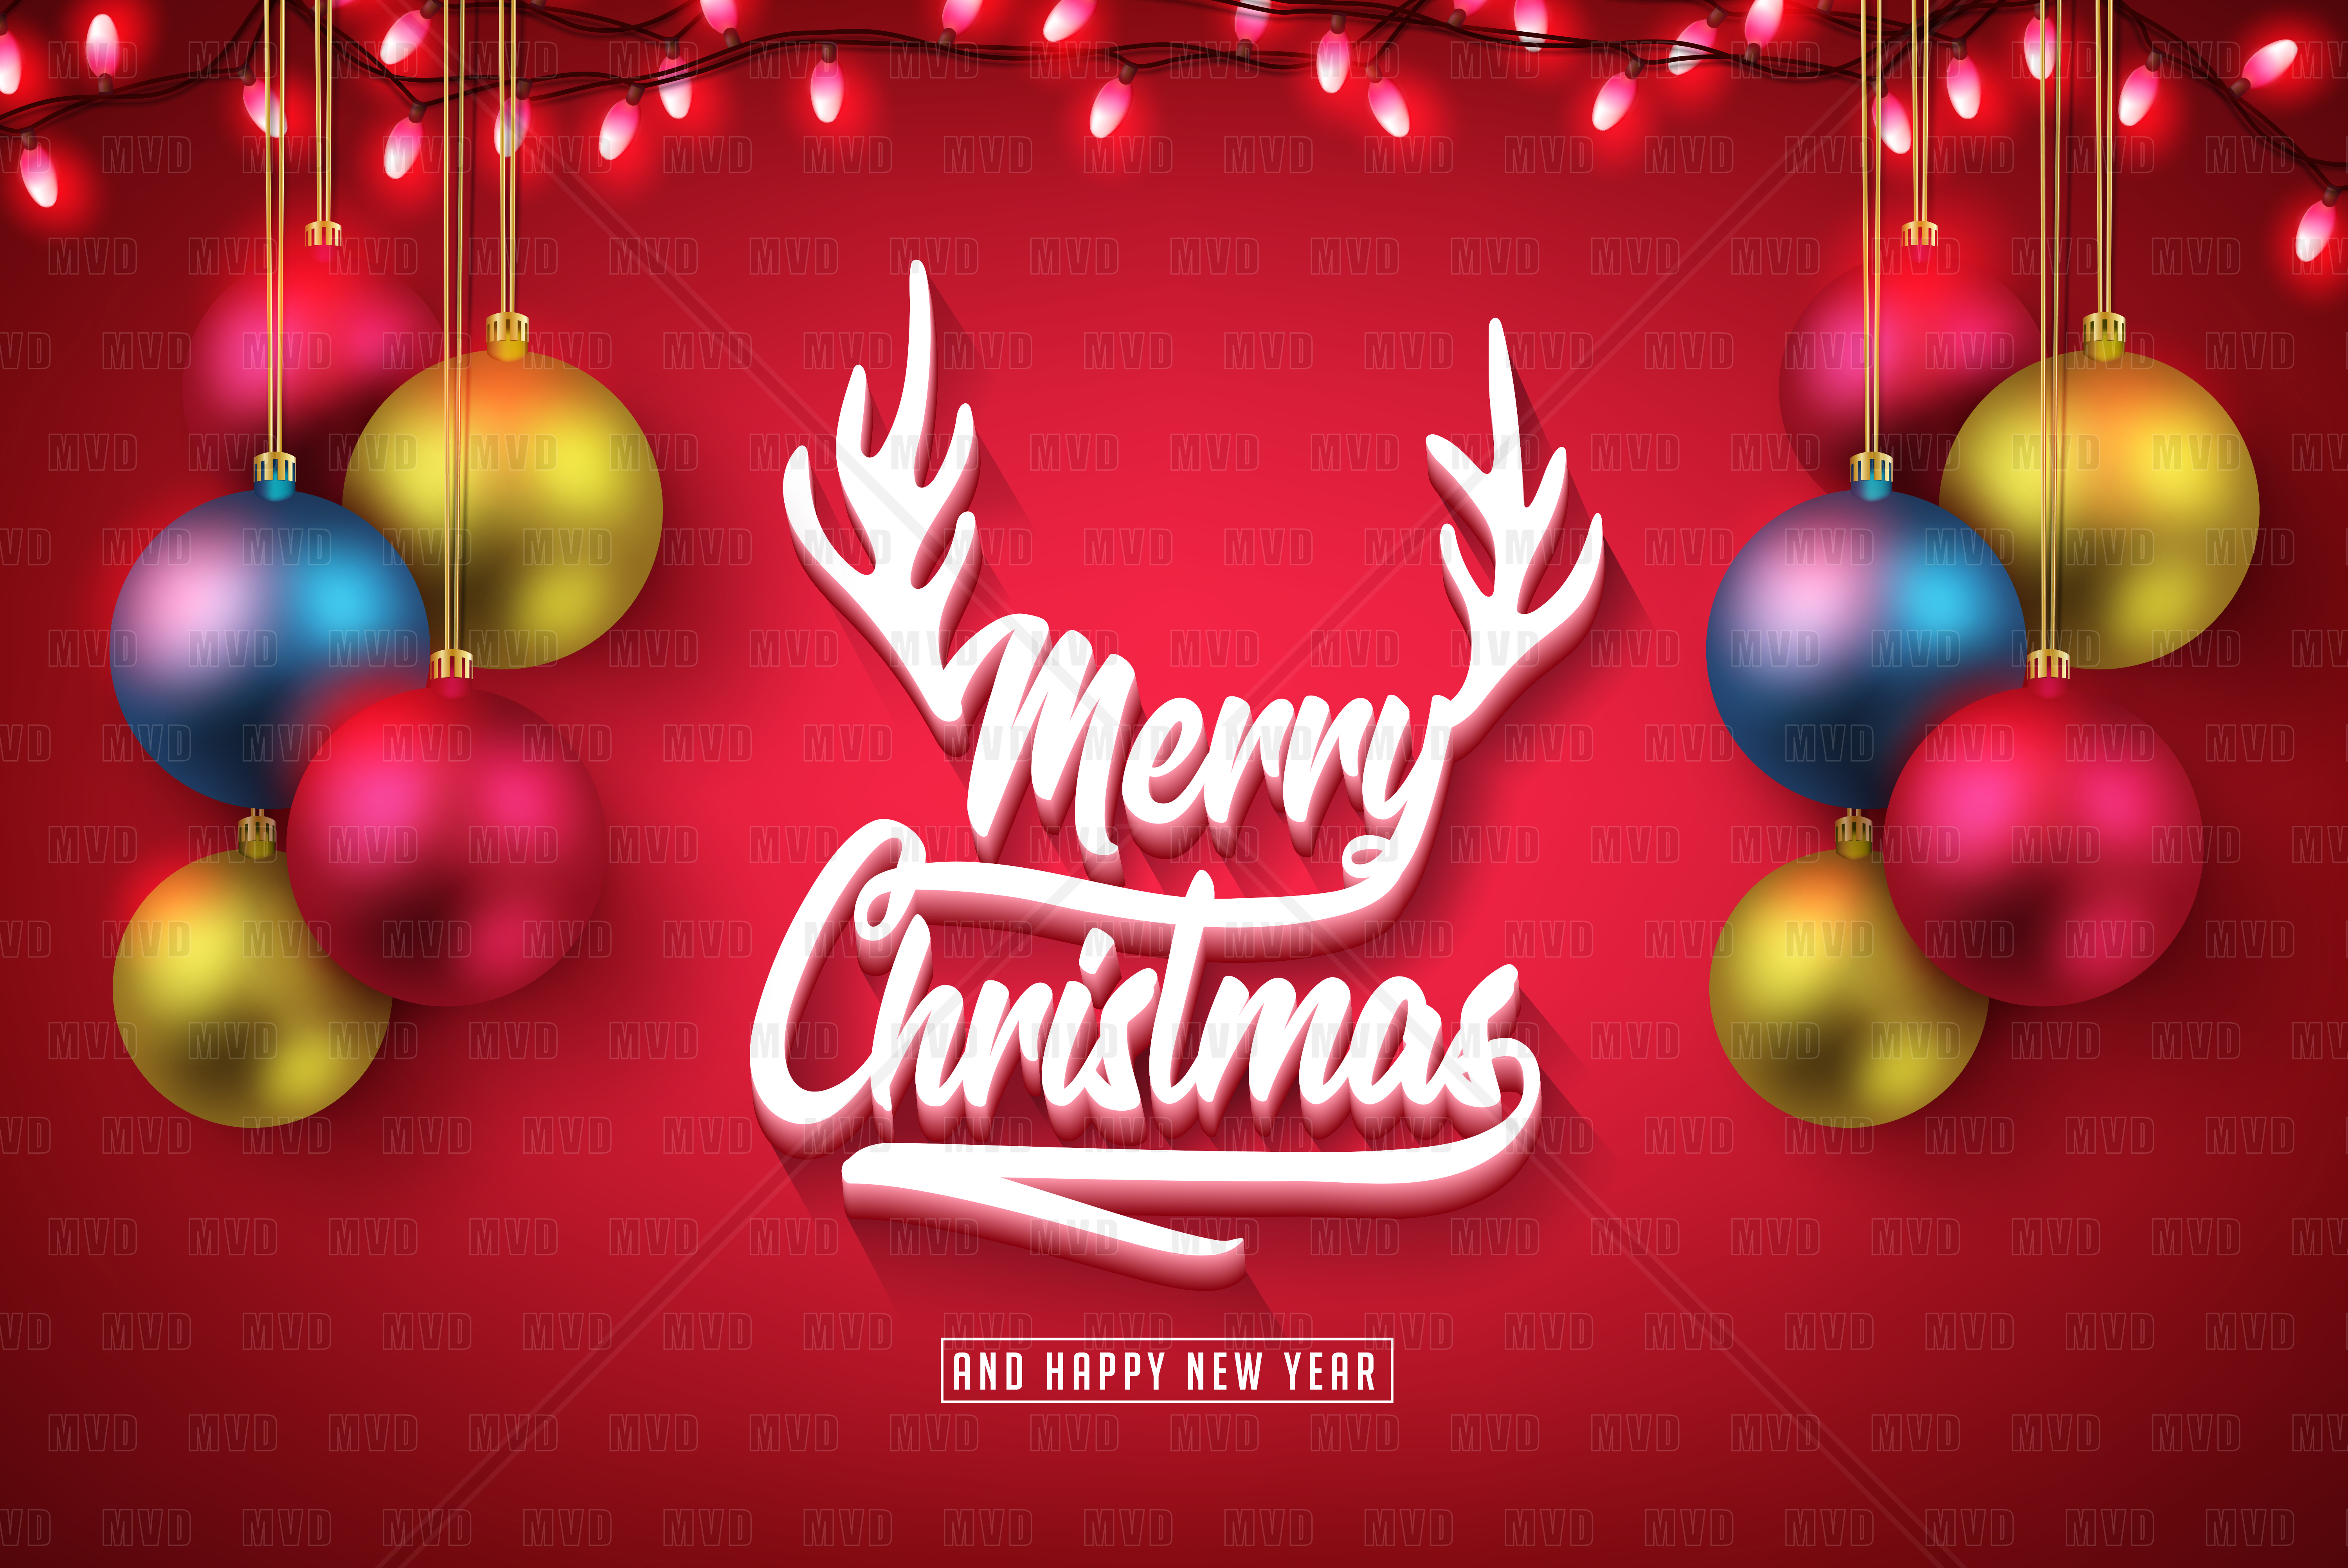 Download Merry Christmas 3D Typography